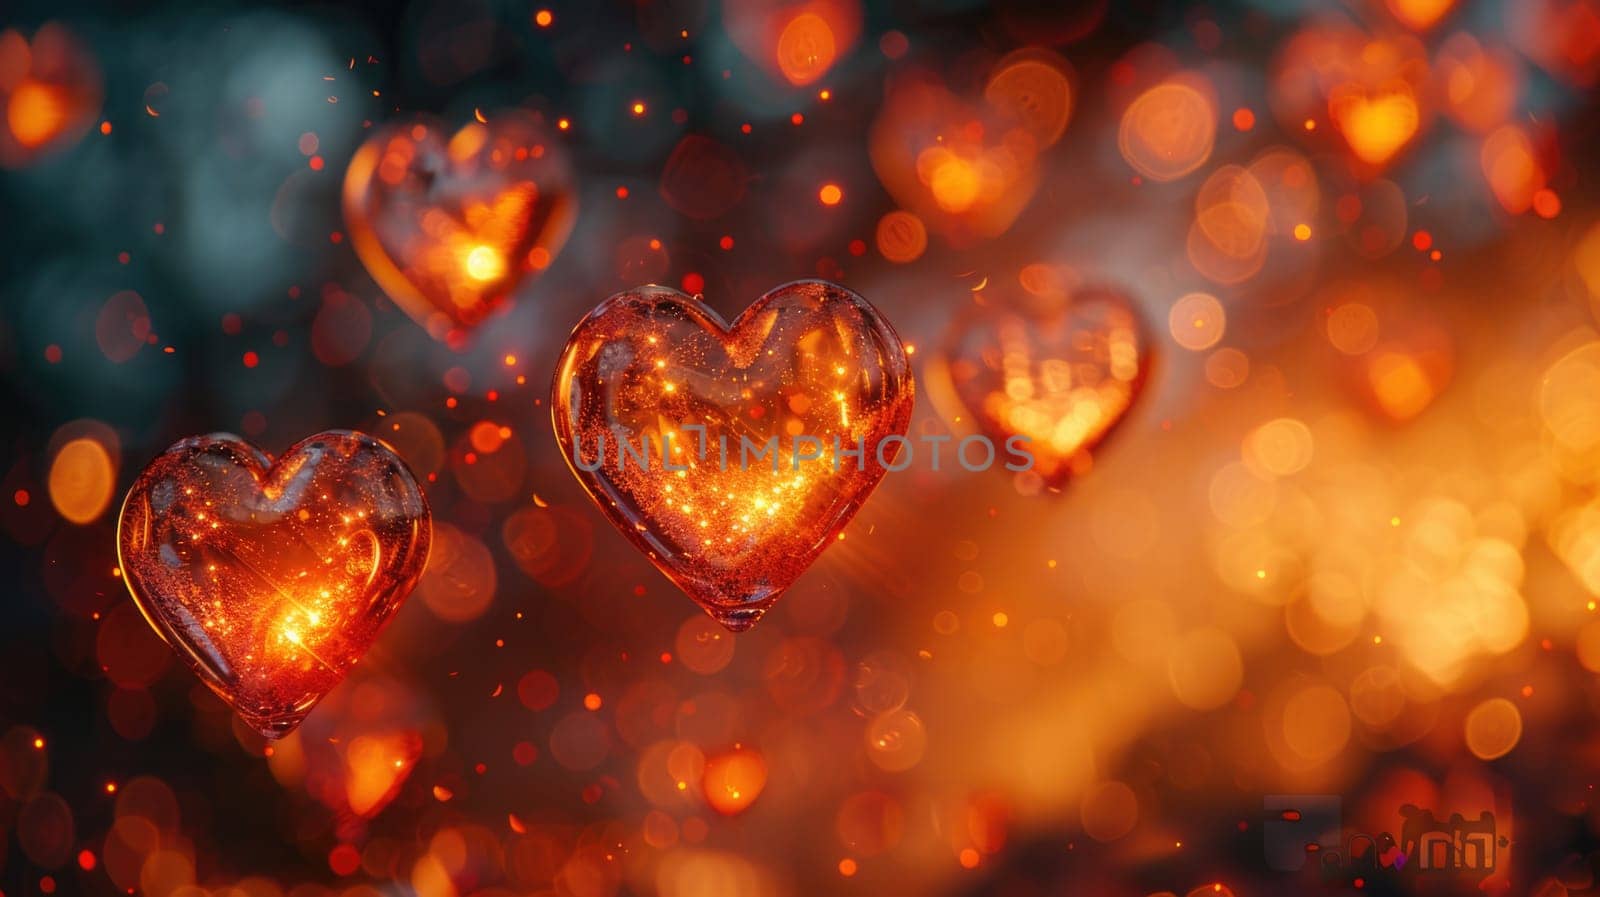 Floating Hearts in the Air by but_photo